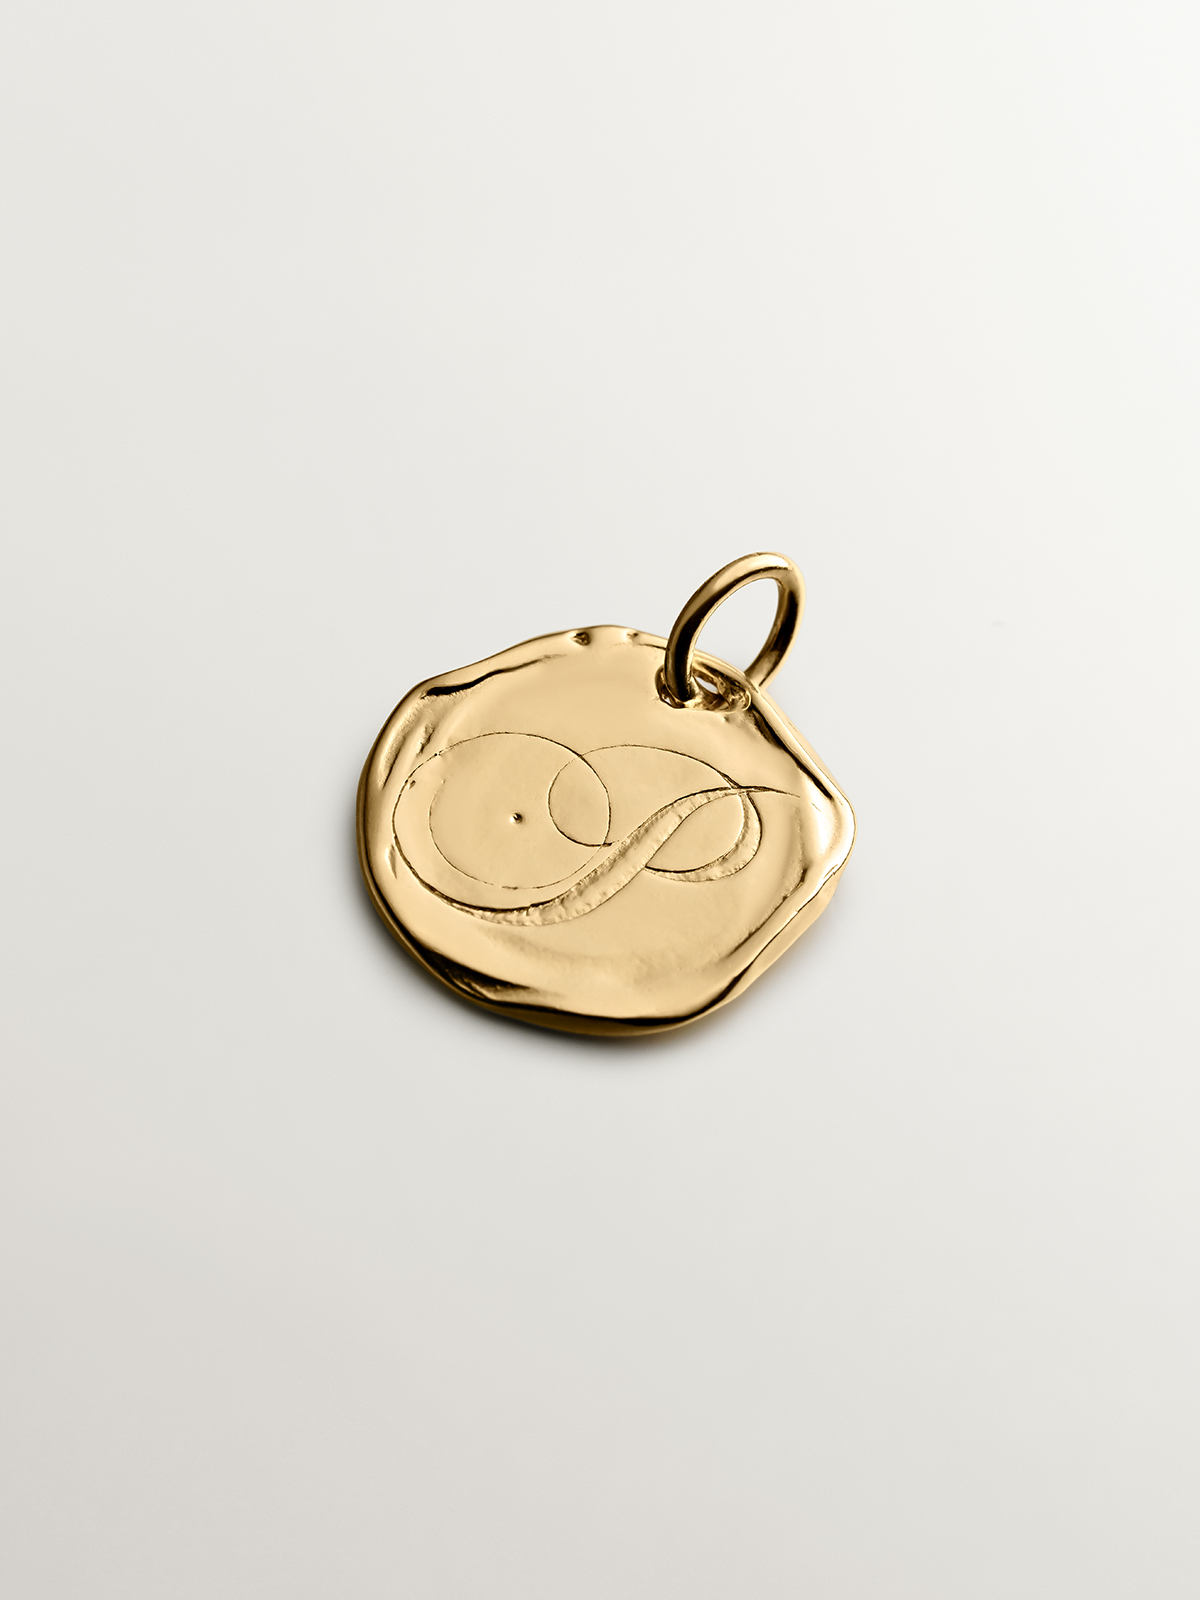 Handcrafted 925 silver charm bathed in 18K yellow gold with initial P.